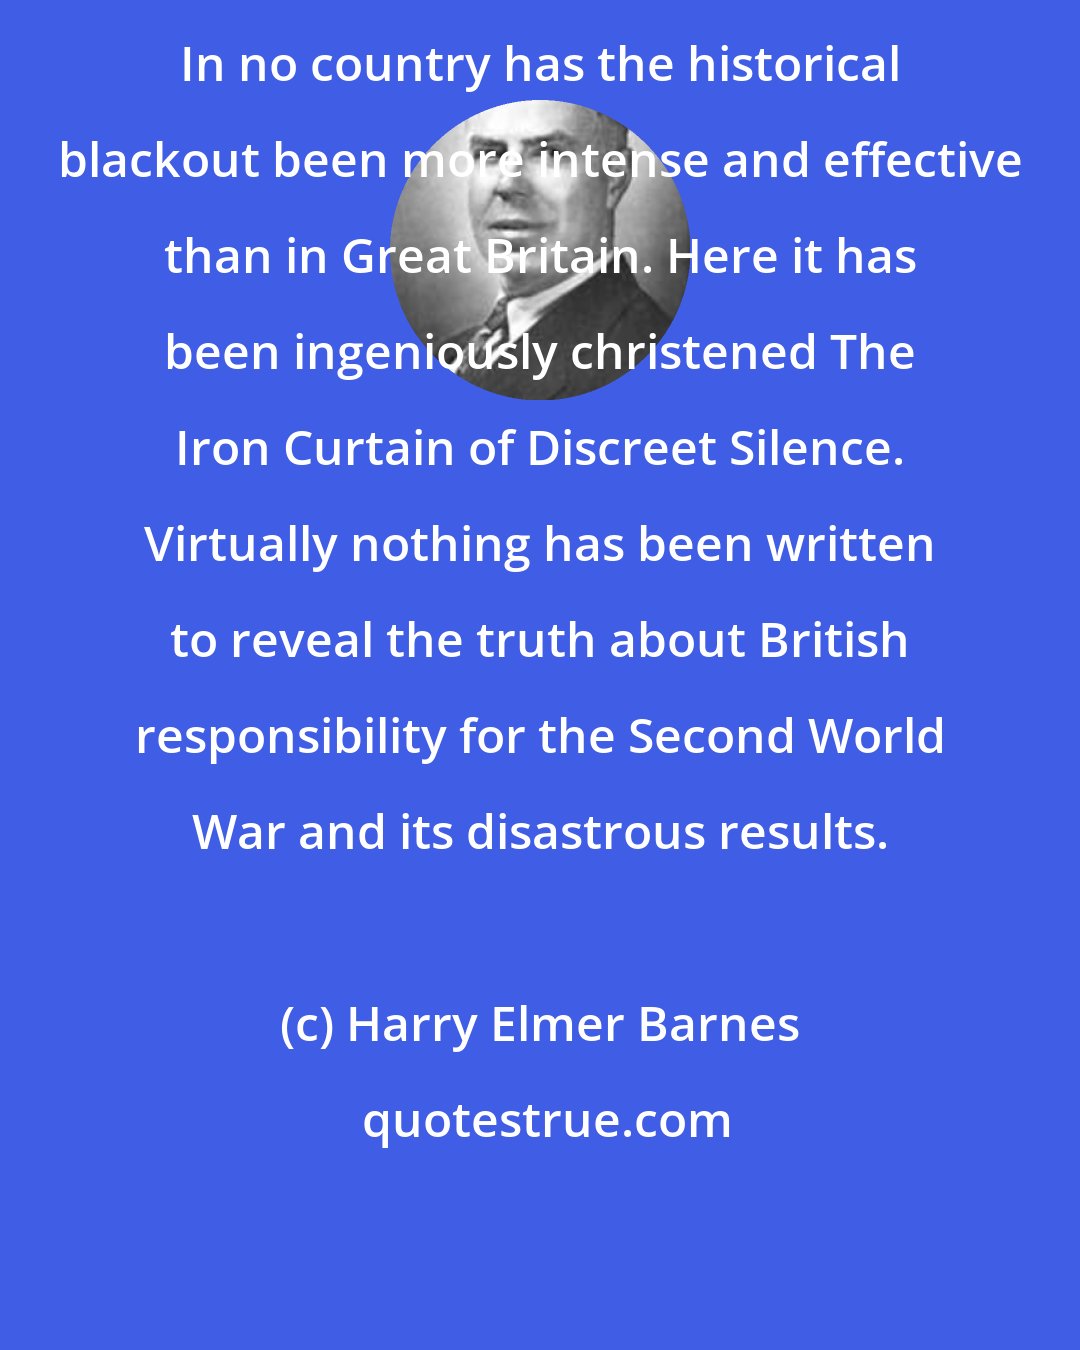 Harry Elmer Barnes: In no country has the historical blackout been more intense and effective than in Great Britain. Here it has been ingeniously christened The Iron Curtain of Discreet Silence. Virtually nothing has been written to reveal the truth about British responsibility for the Second World War and its disastrous results.